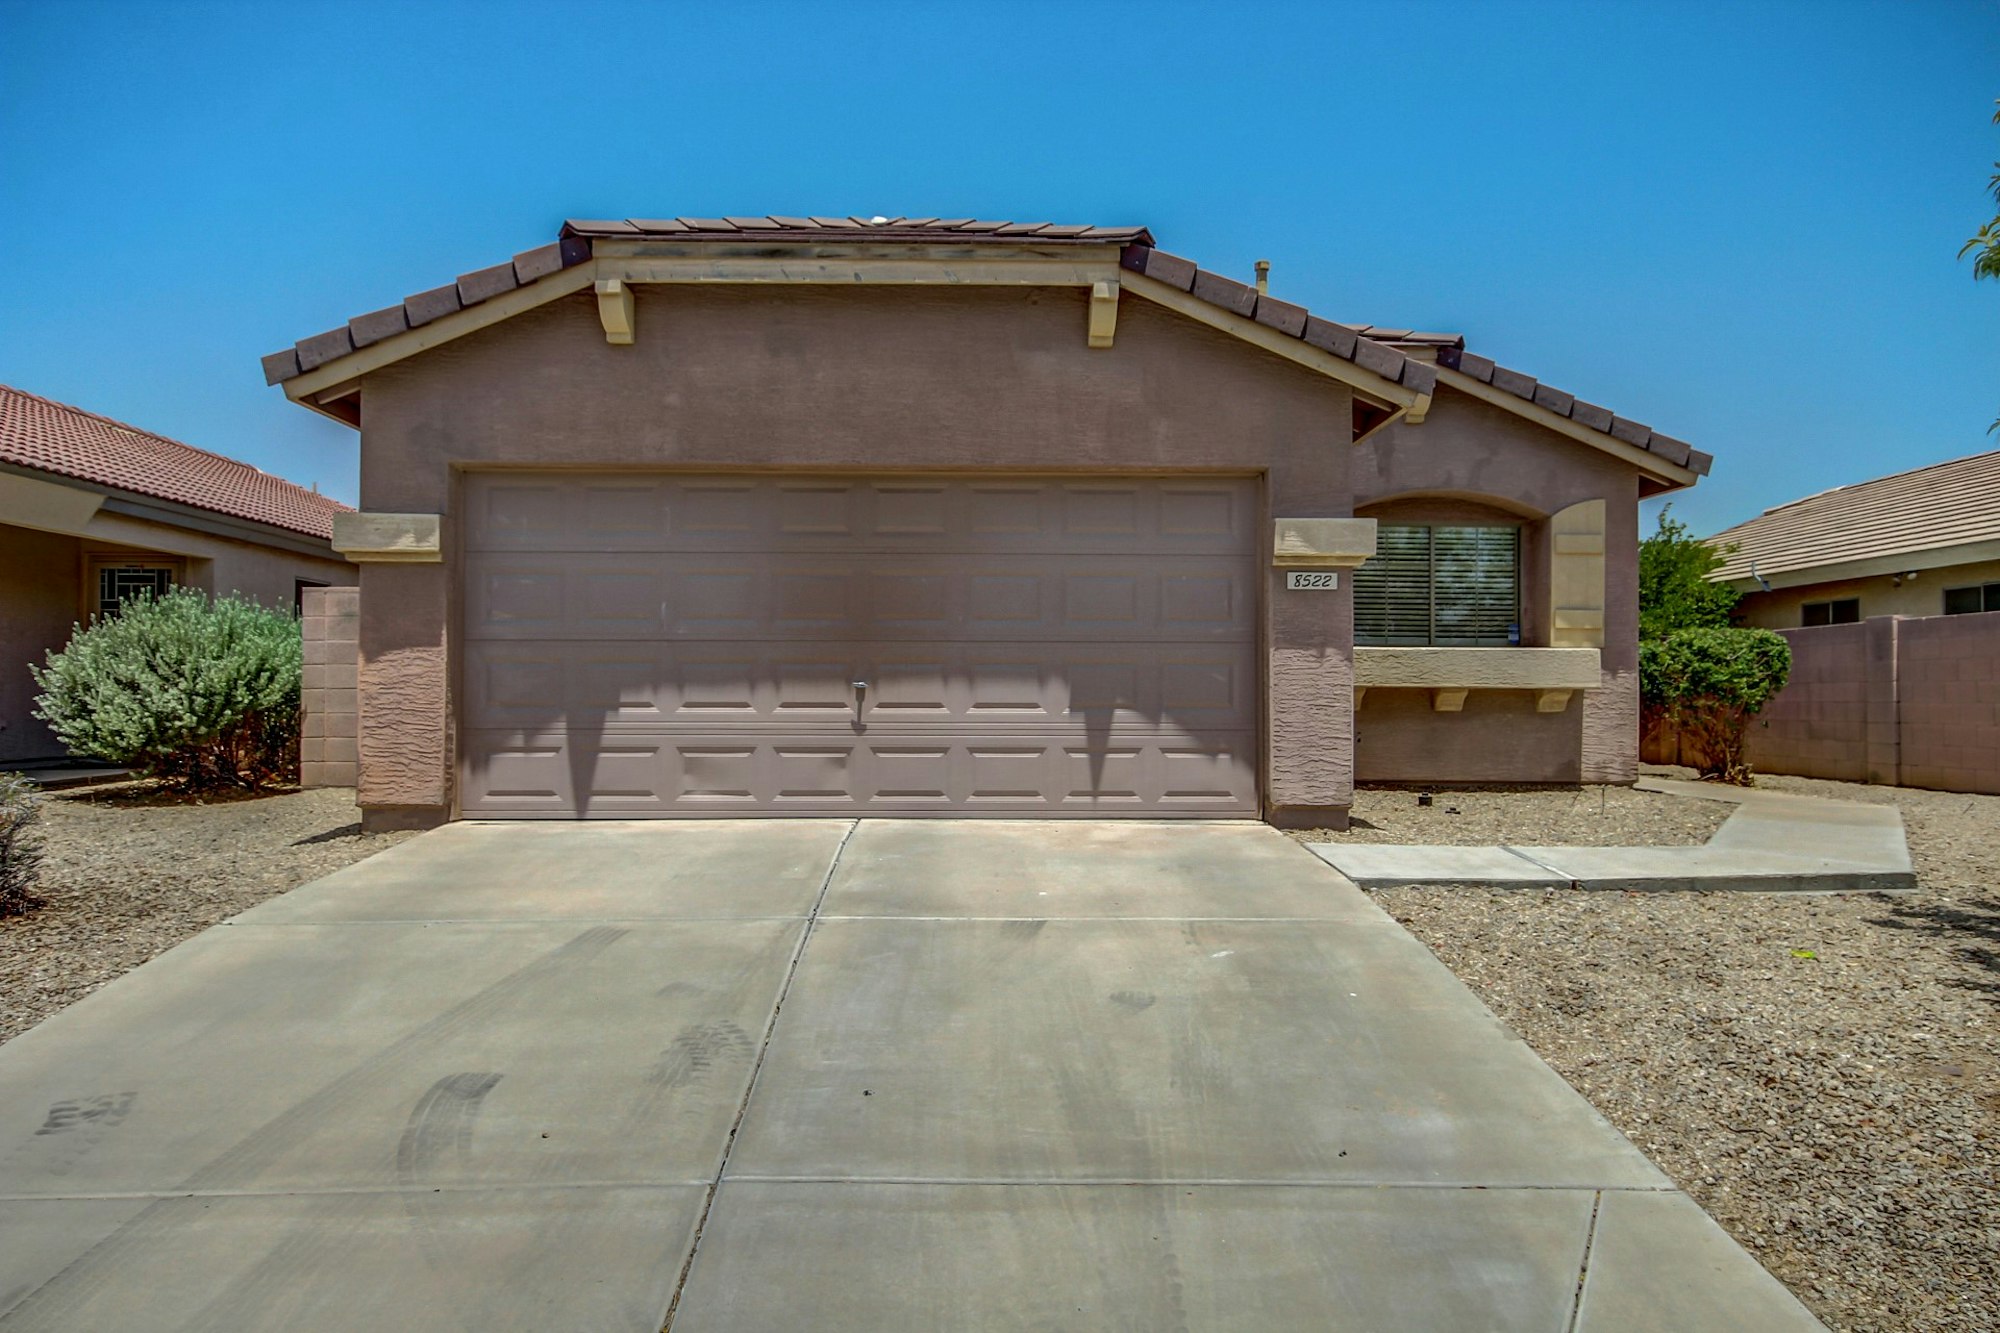 Photo 1 of 19 - 8522 W Gross Ave, Tolleson, AZ 85353